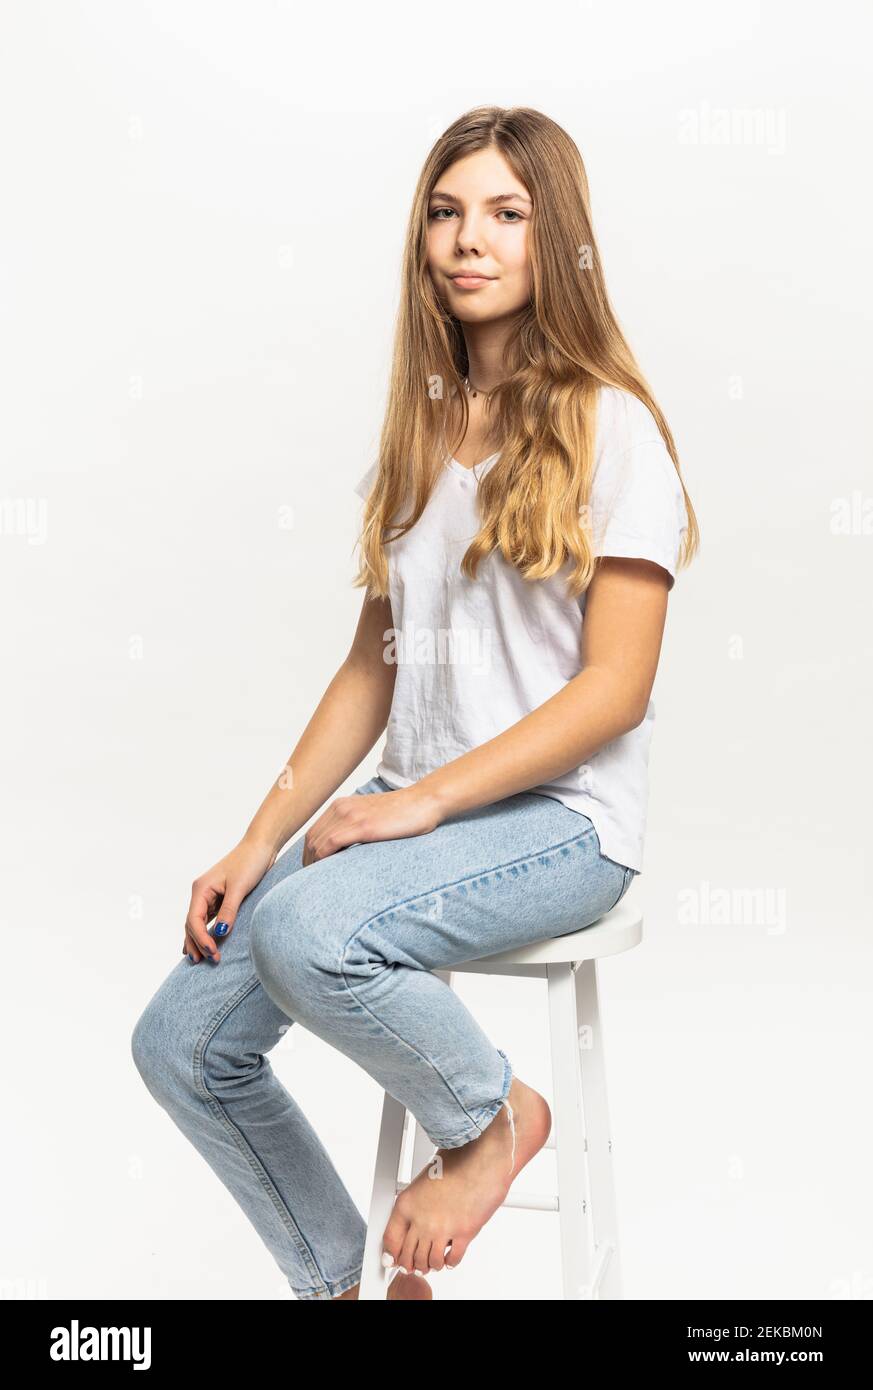 Pre-adolescent girl sitting on stool against white background in studio Stock Photo